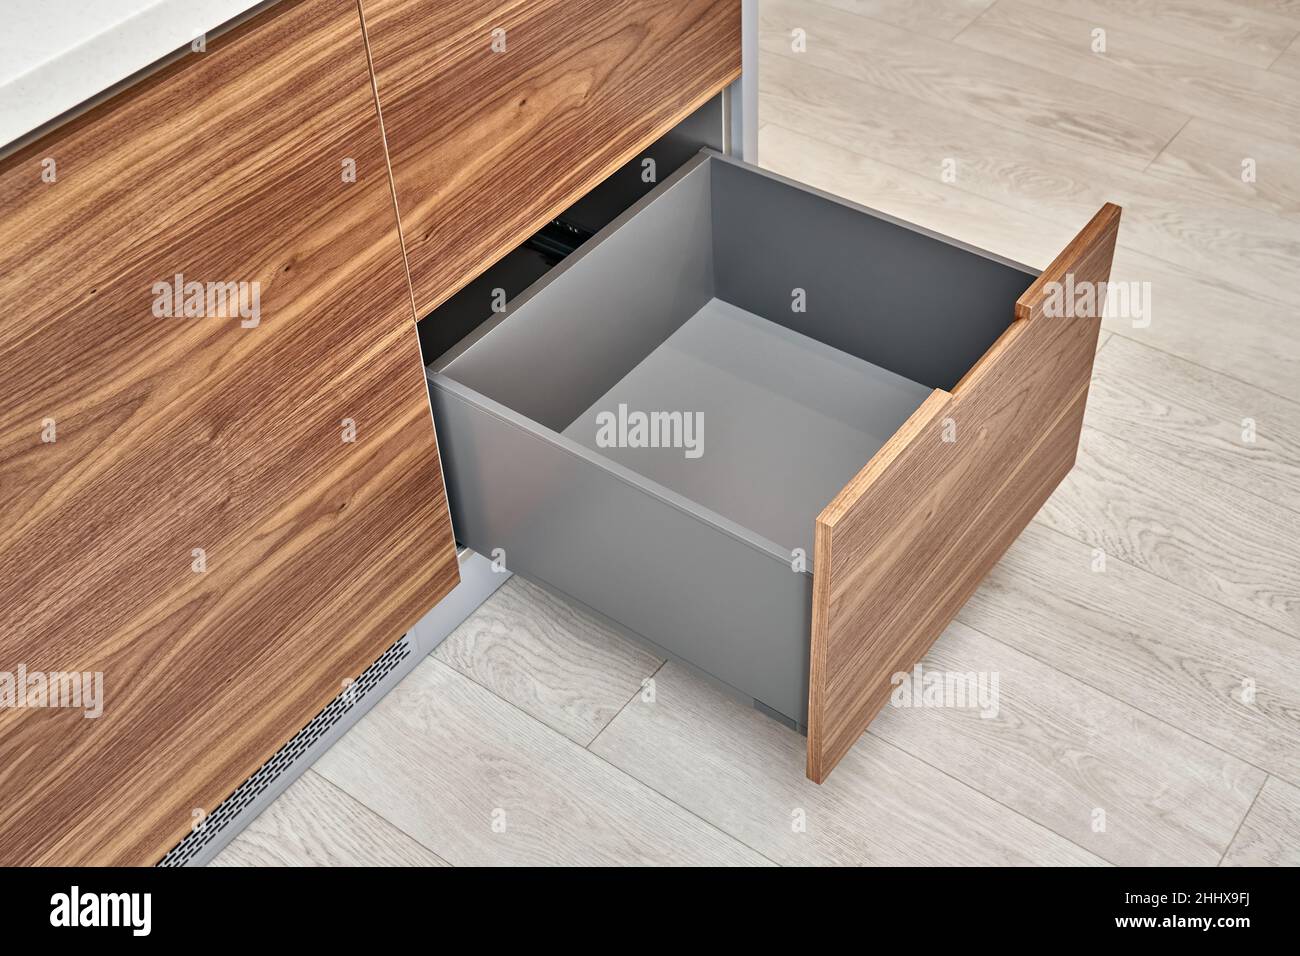 Open lower drawer of dark grey color in contemporary kitchen of walnut wood and gray color with acrylic solid surface countertop close-up Stock Photo